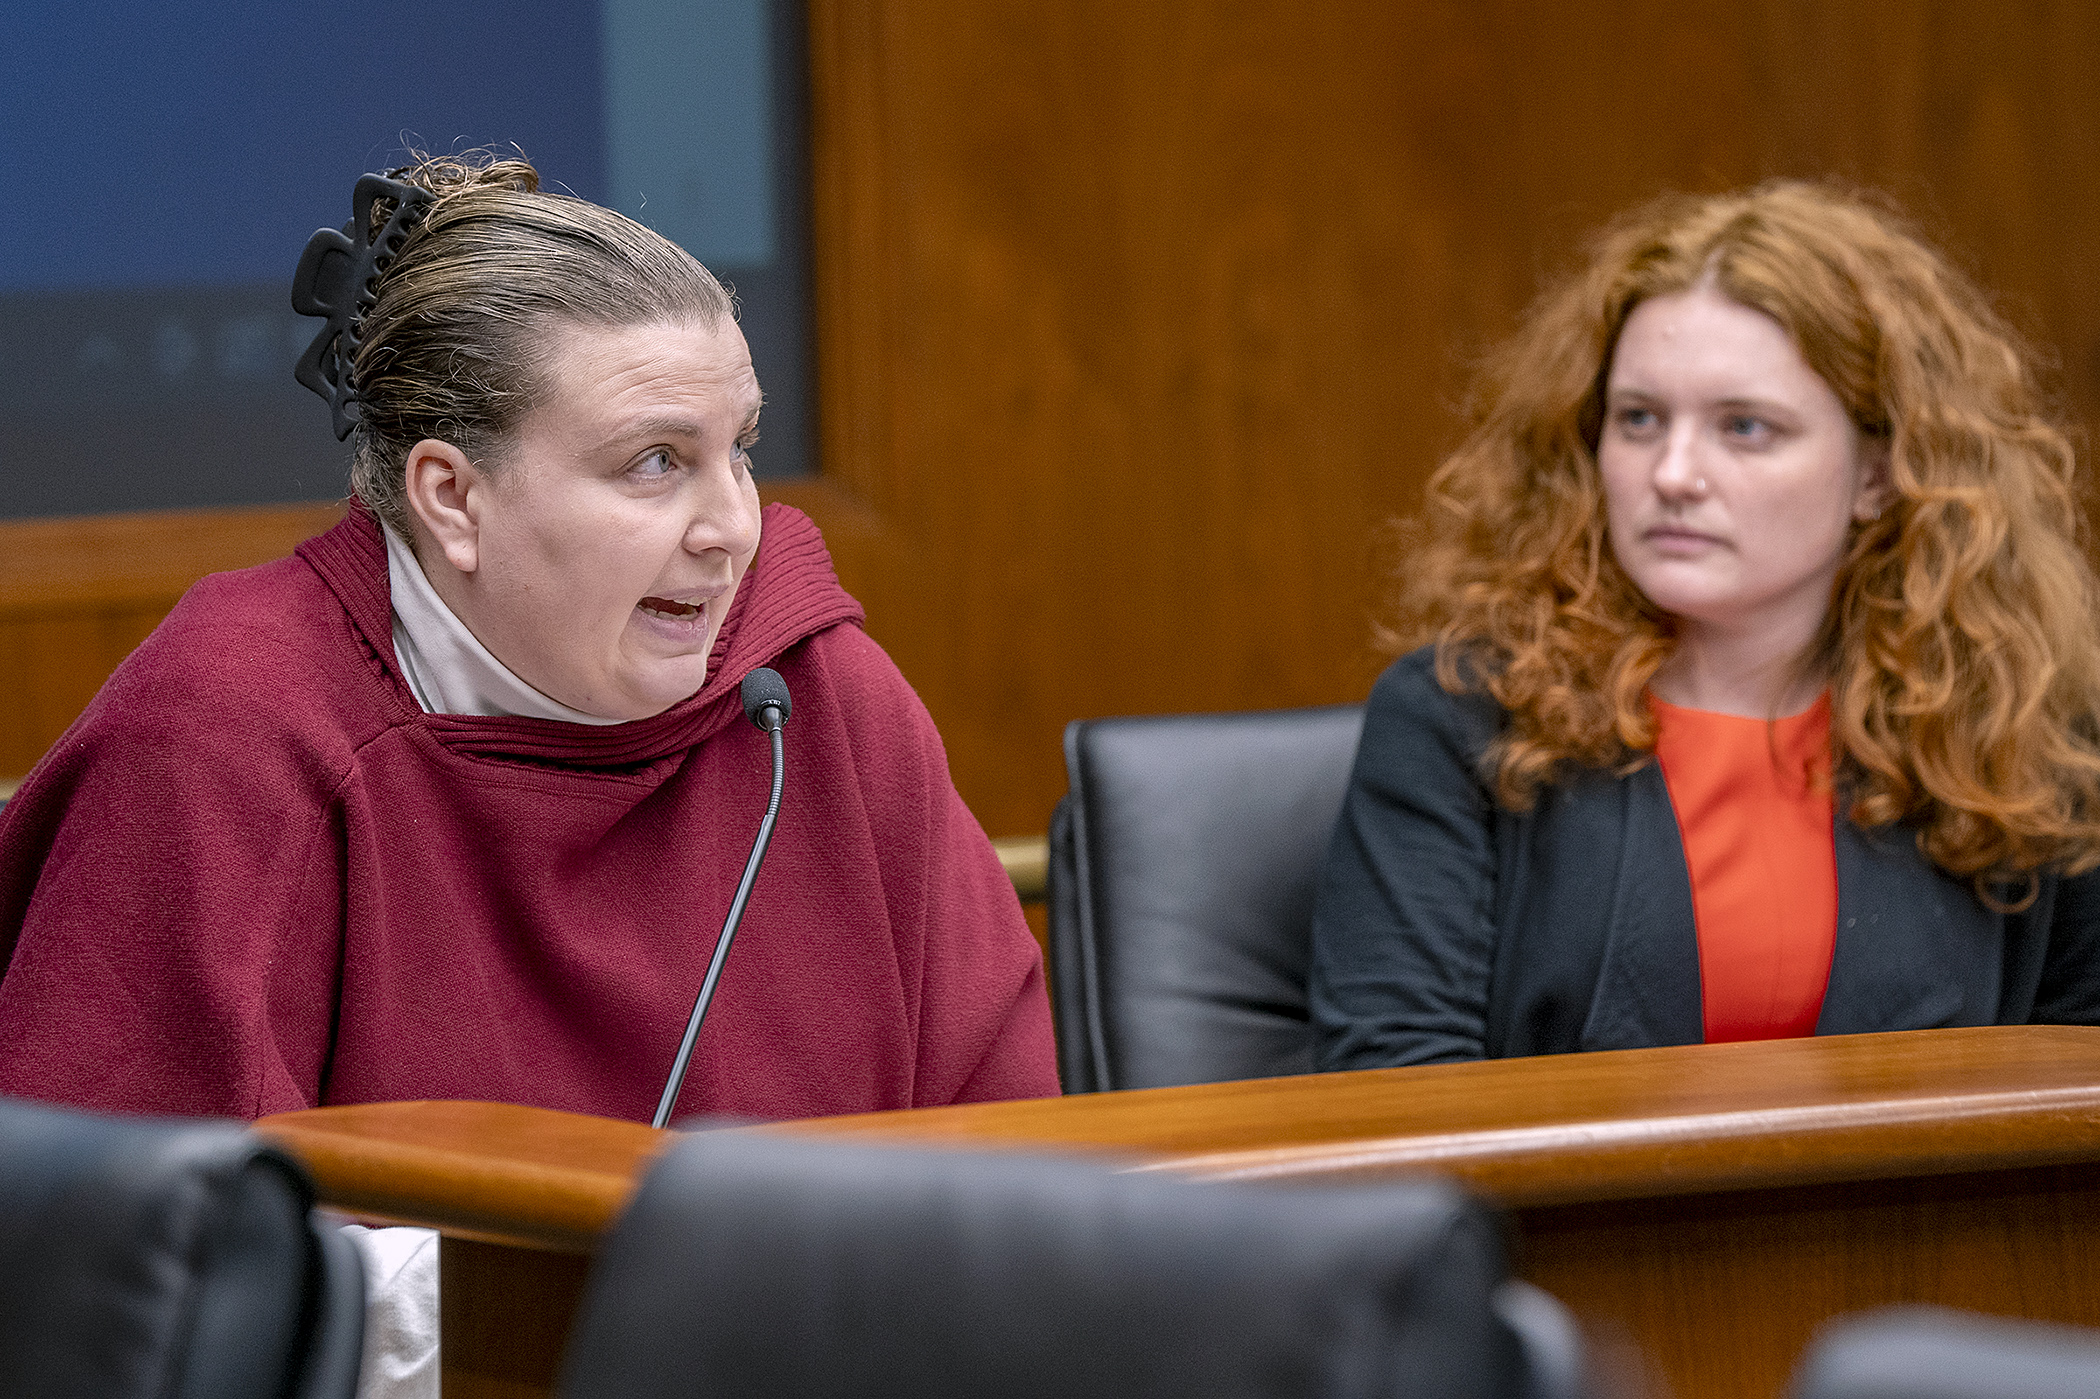 Kelly Kausel, a nutrition assistant at Roseville Area Schools, testifies Wednesday in support of HF3556, a bill requiring a minimum time for students to eat lunch. Rep. Sydney Jordan, right, is the bill sponsor. (Photo by Michele Jokinen)